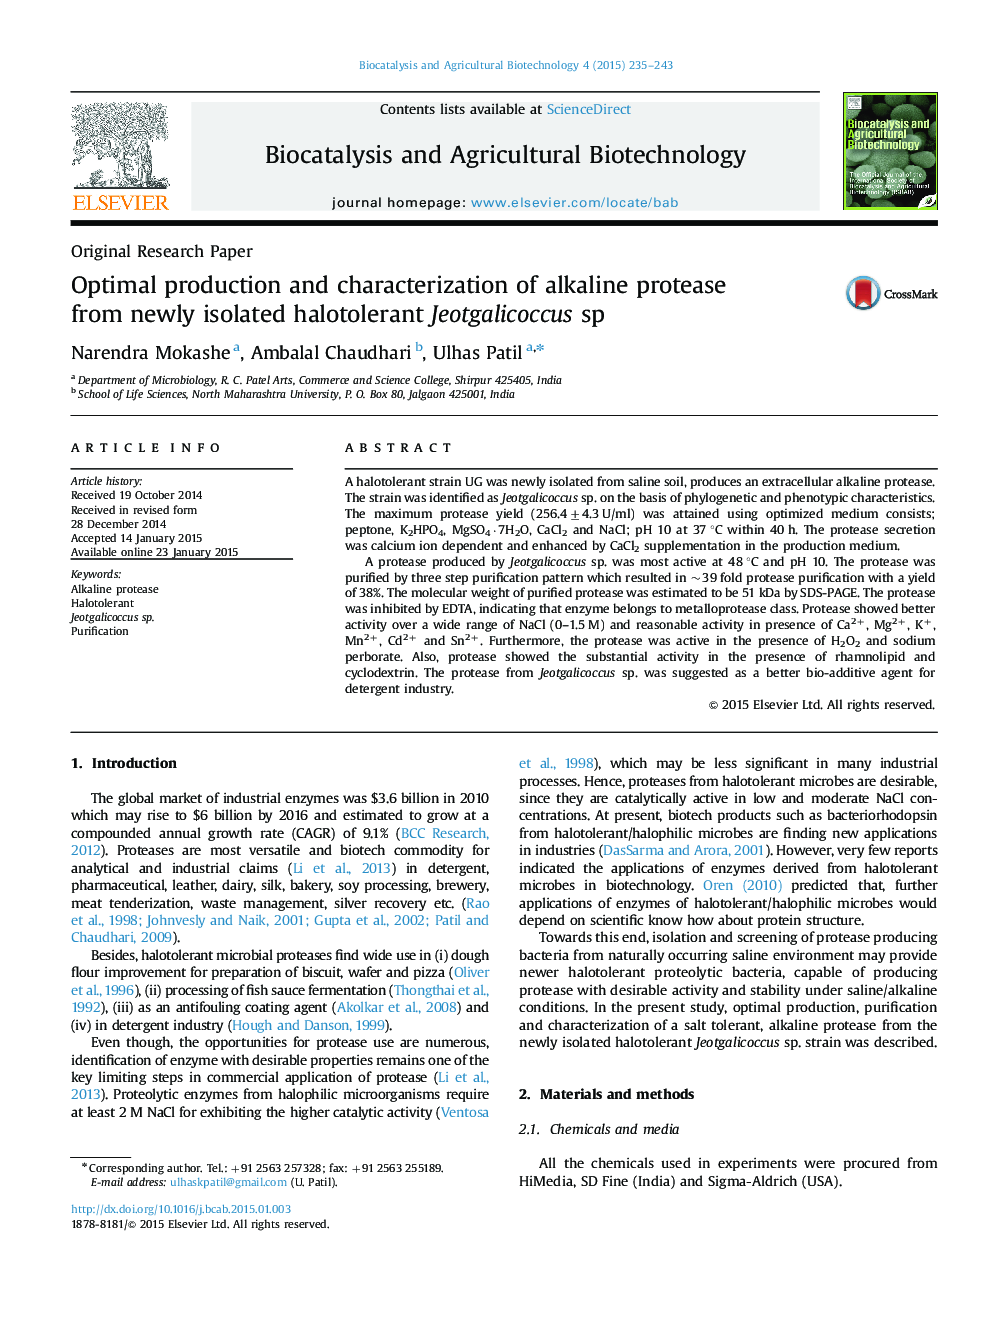 Optimal production and characterization of alkaline protease from newly isolated halotolerant Jeotgalicoccus sp